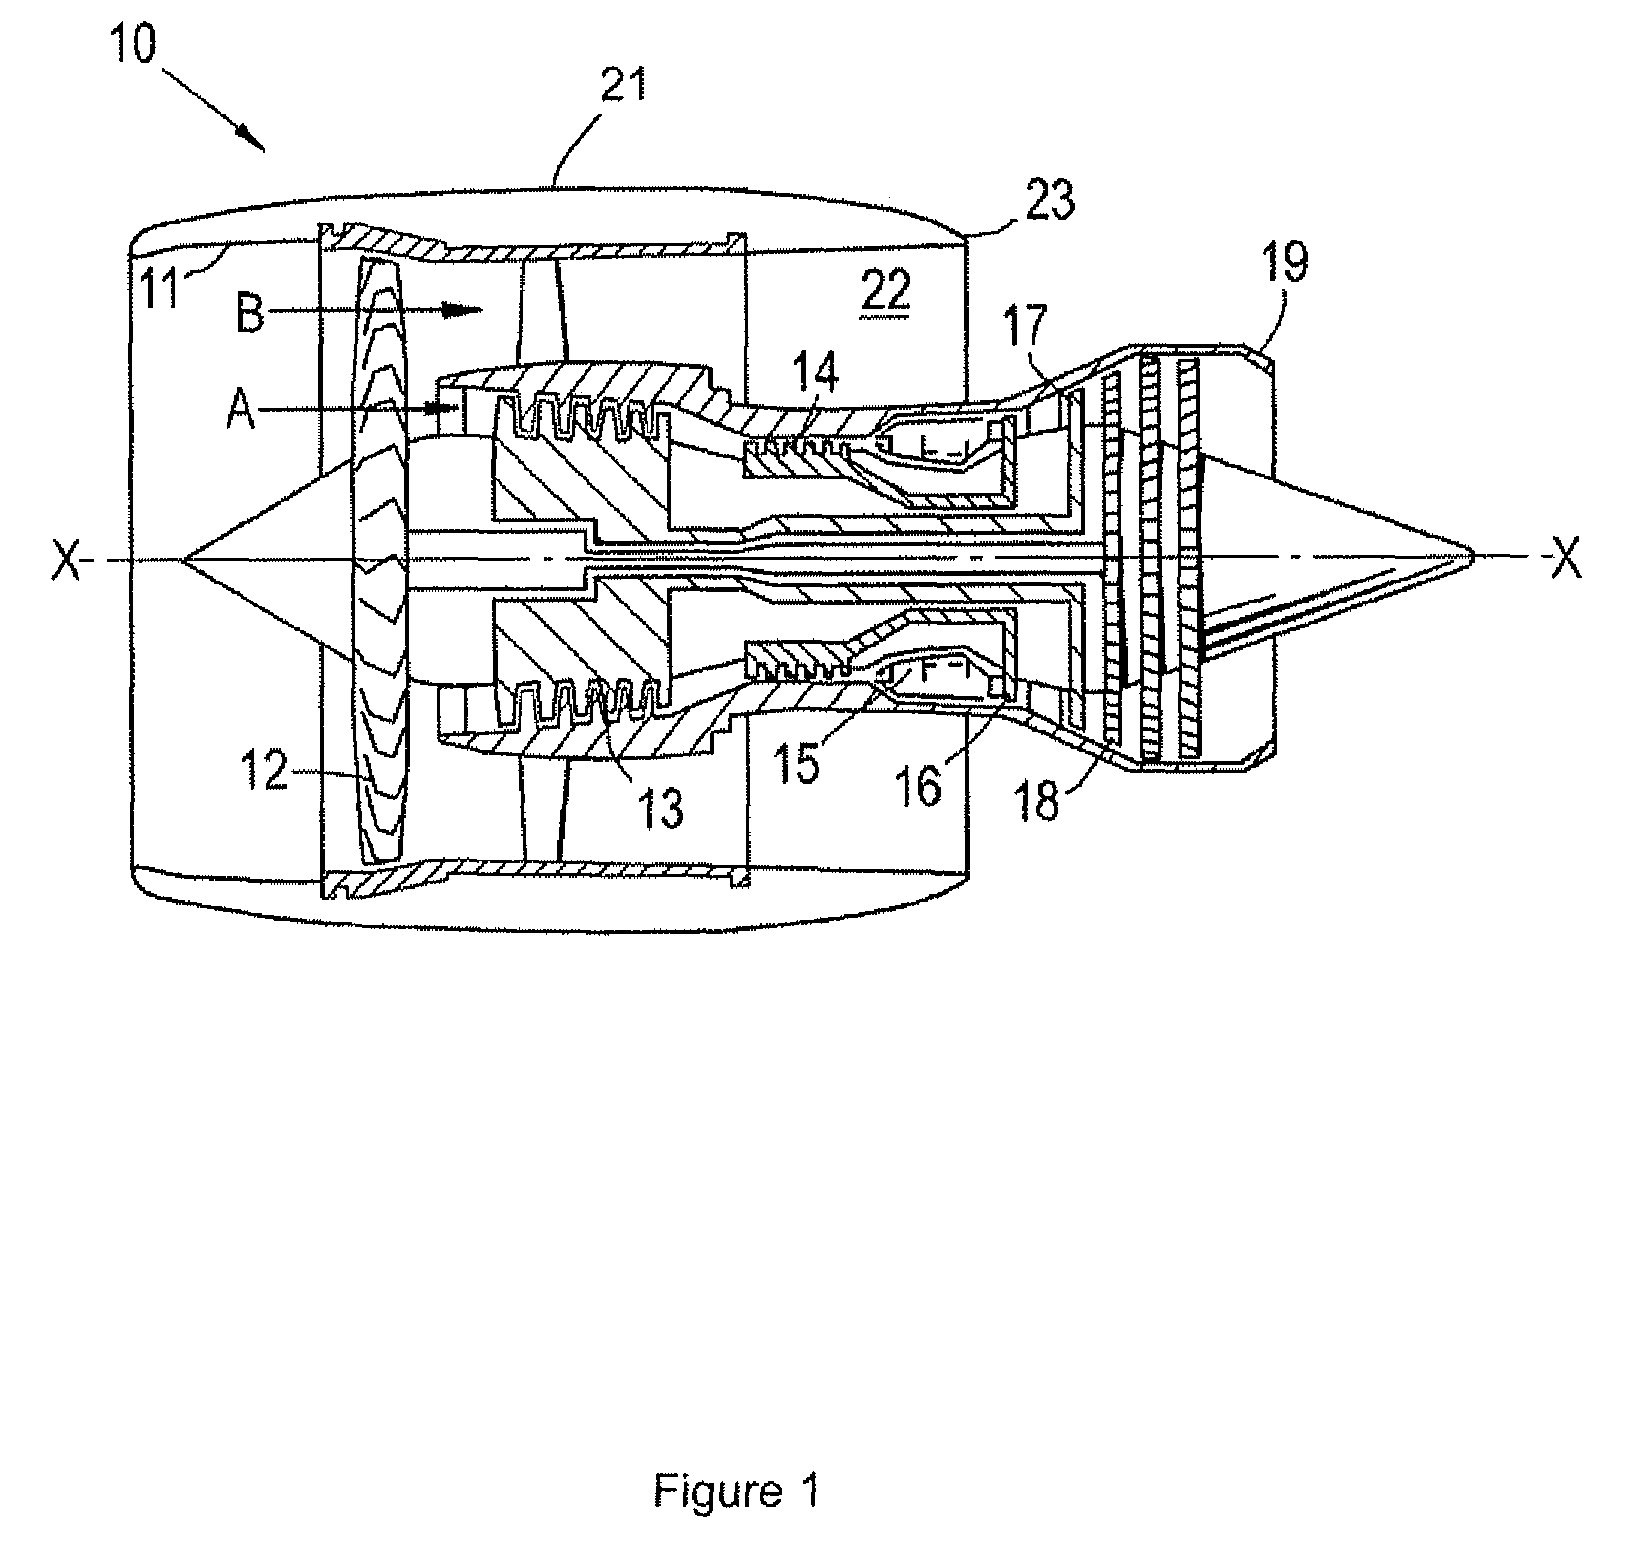 Gas turbine engine having a multi-variable closed loop controller for regulating tip clearance